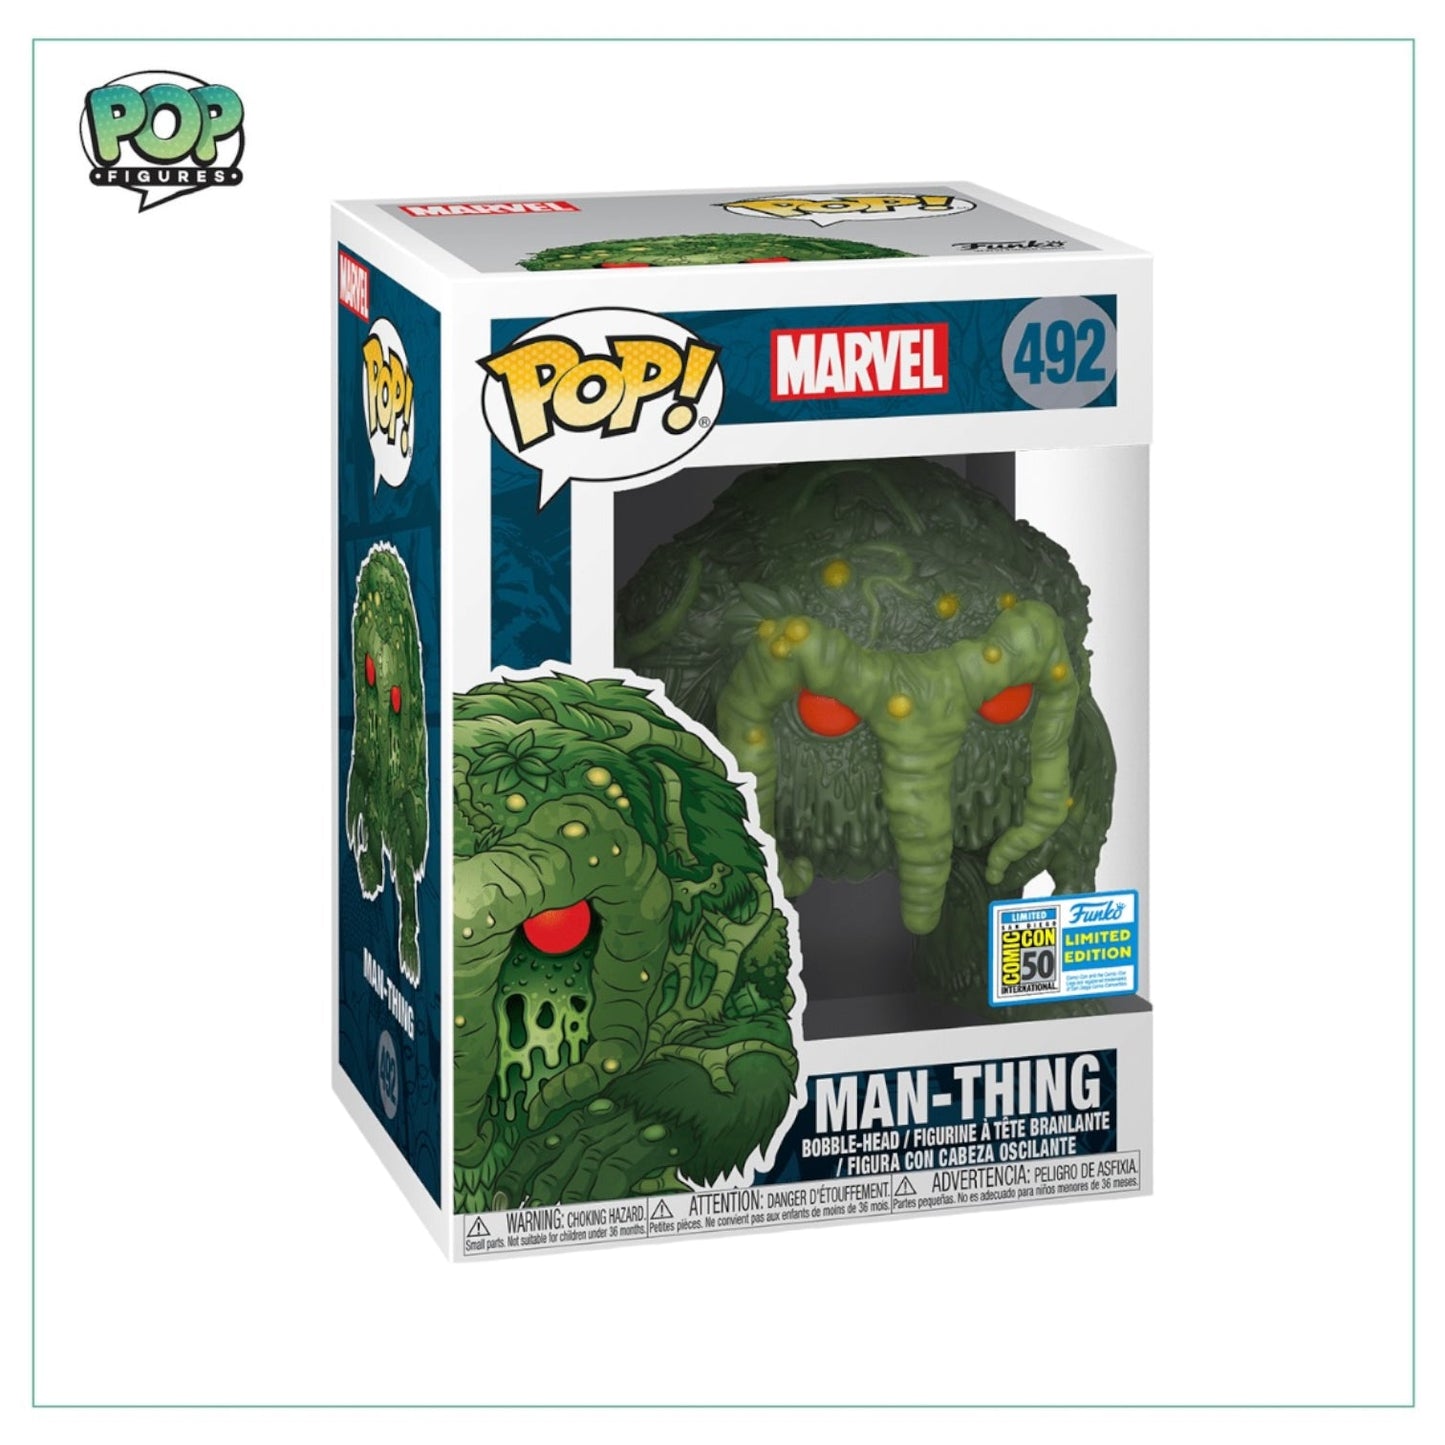 Man-Thing #492 Funko Pop! Marvel, 2019 SDCC Limited Edition Exclusive - Angry Cat